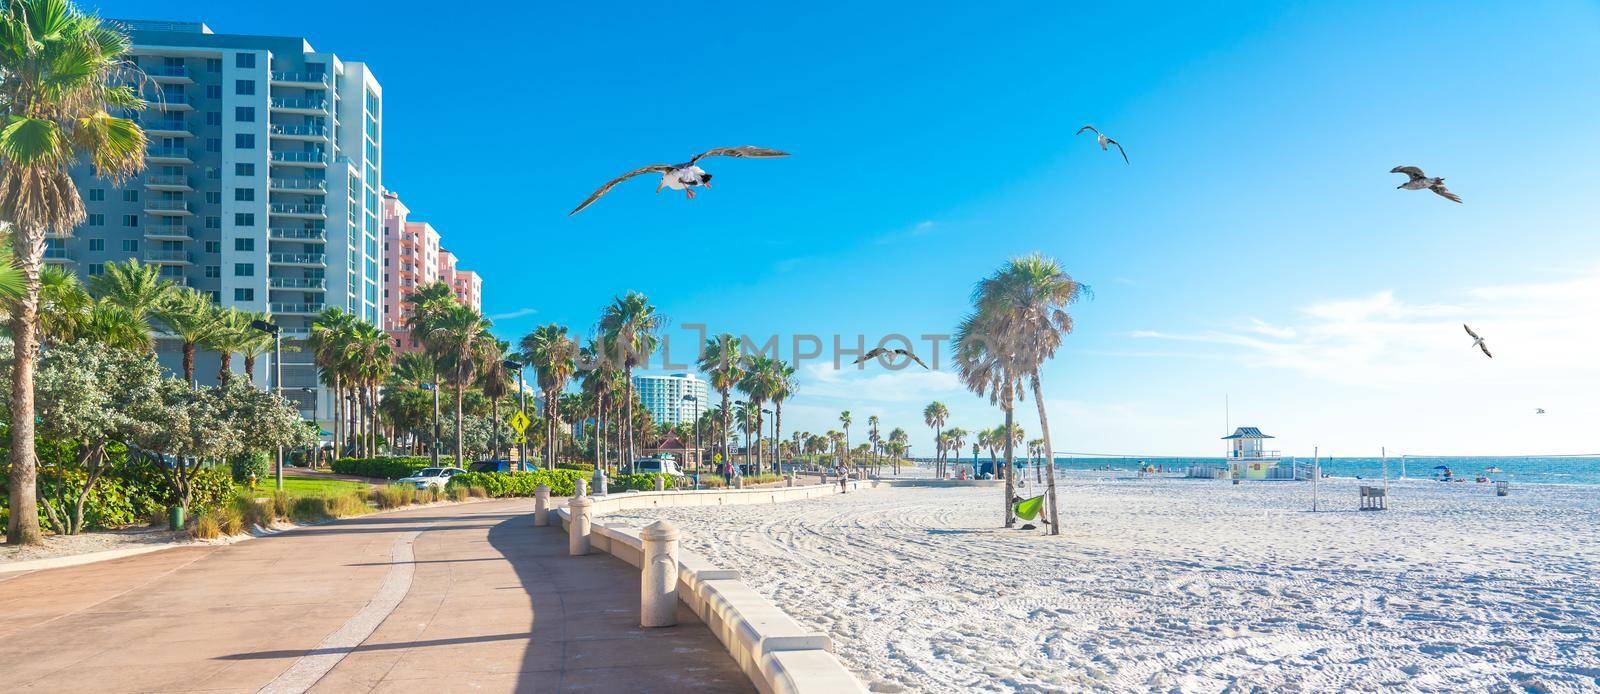 Beautiful Clearwater beach with sand in Florida USA